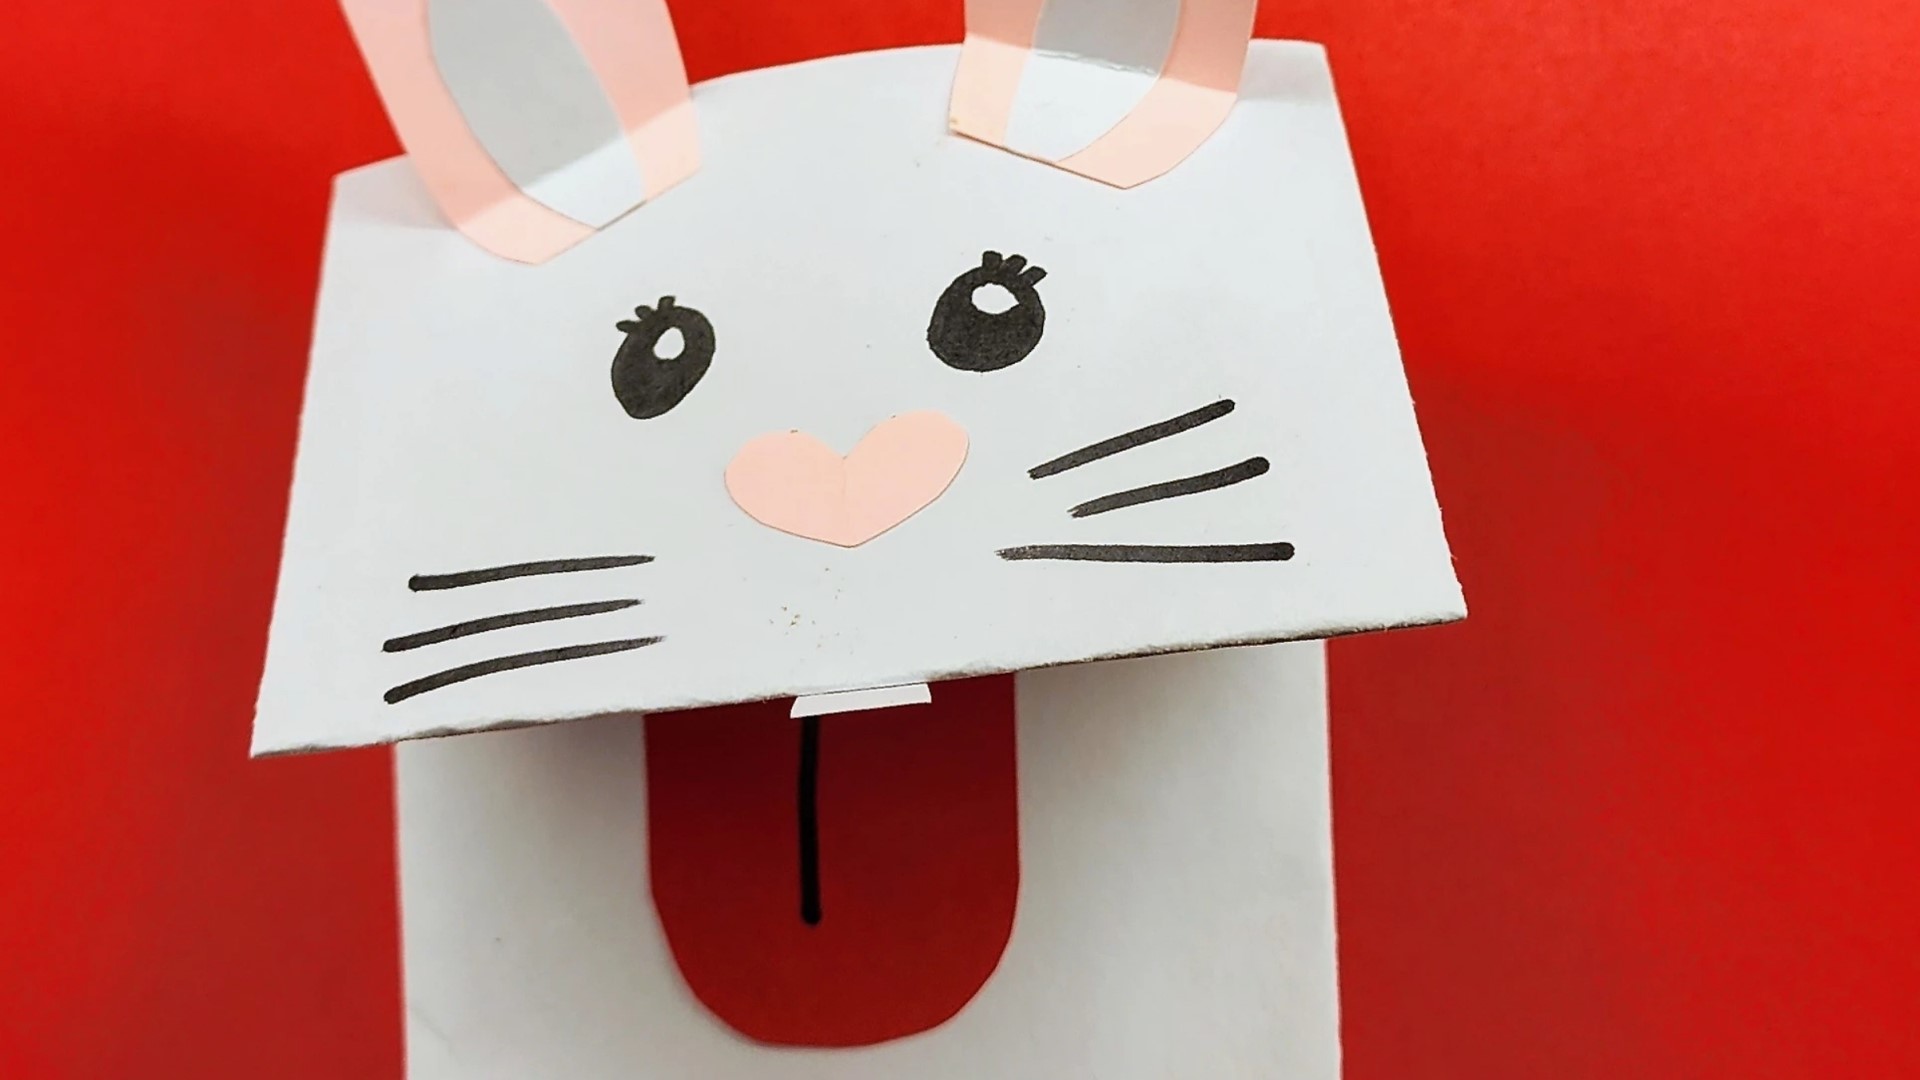 Children can learn how to make rabbit hand puppets for the Year of the Rabbit.